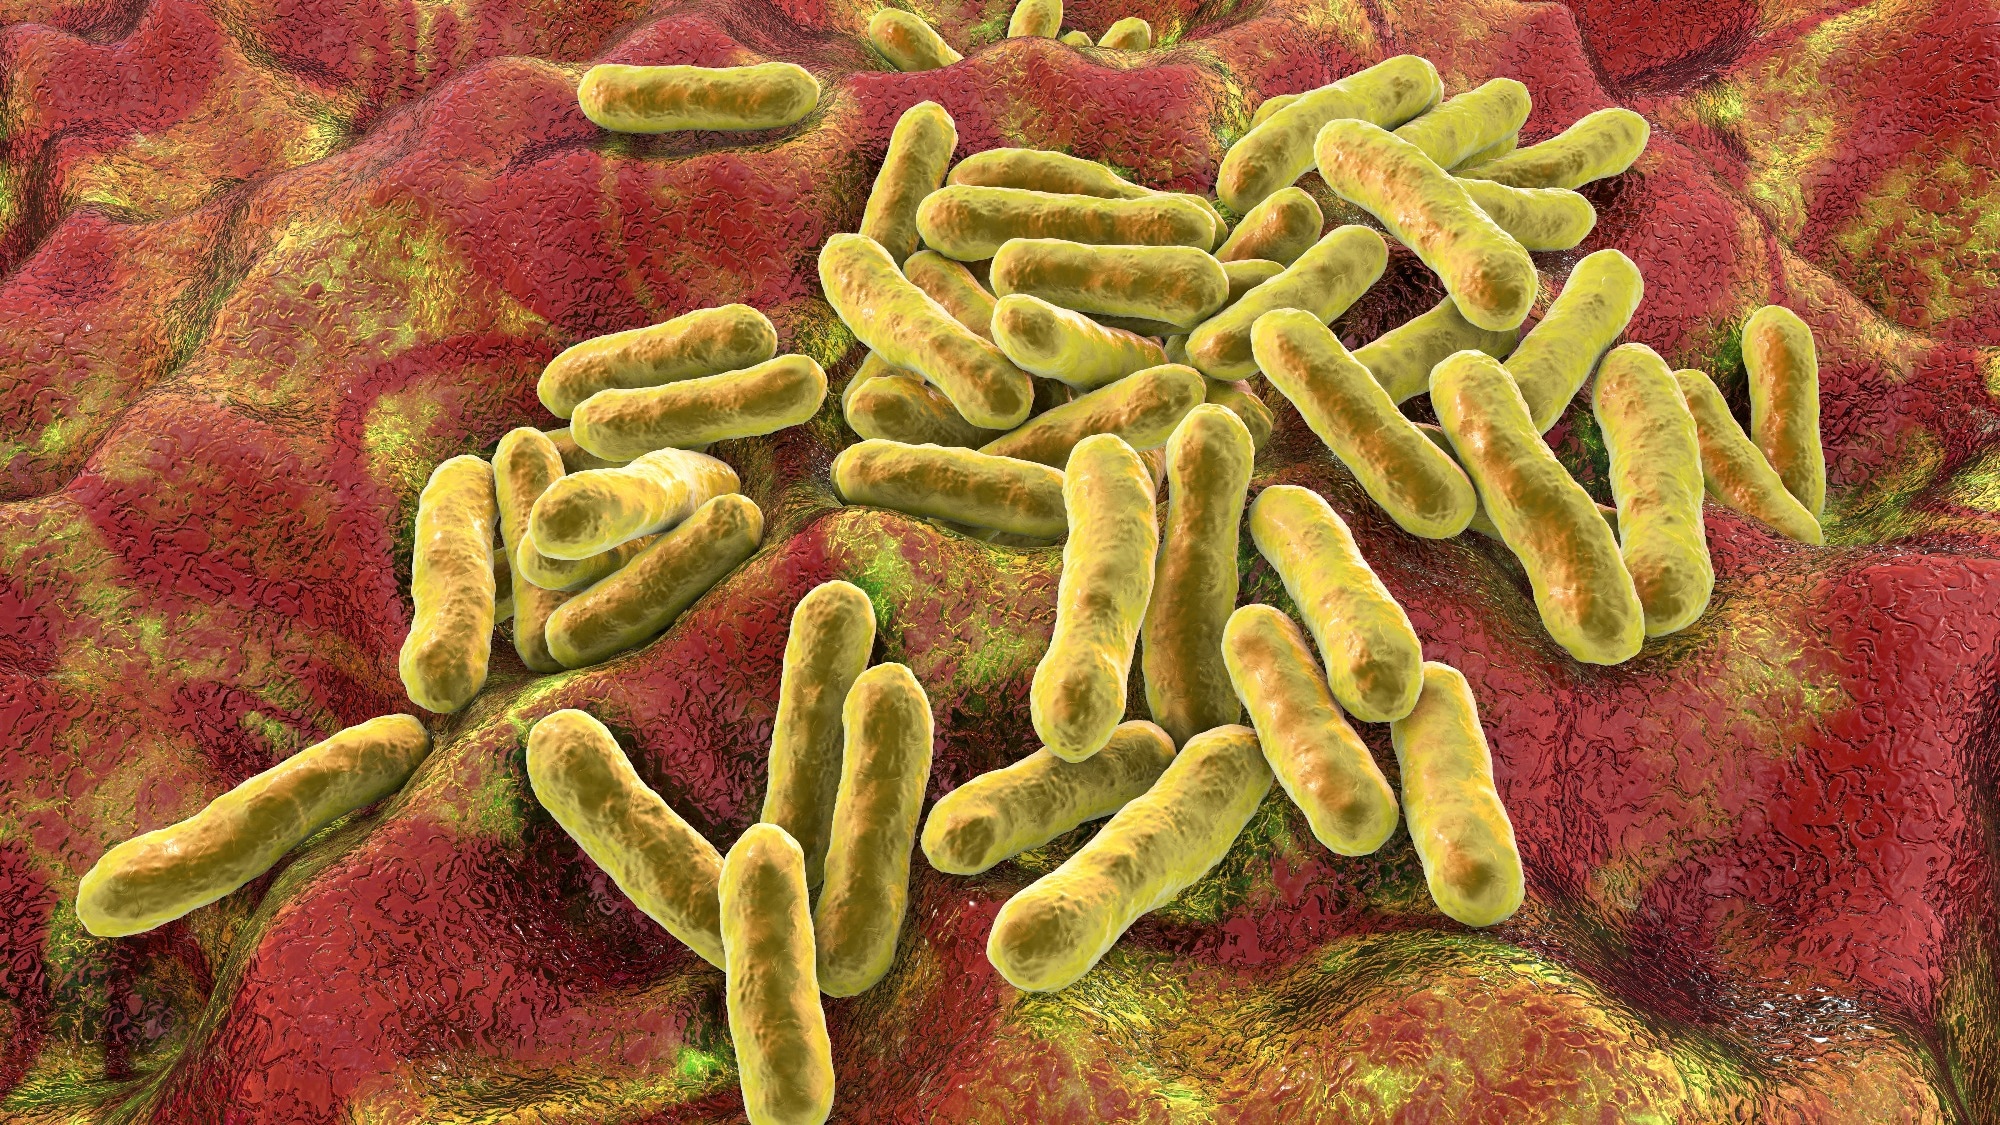 Study: Commensal Cutibacterium acnes induce epidermal lipid synthesis important for skin barrier function. Image Credit: Kateryna Kon/Shutterstock.com